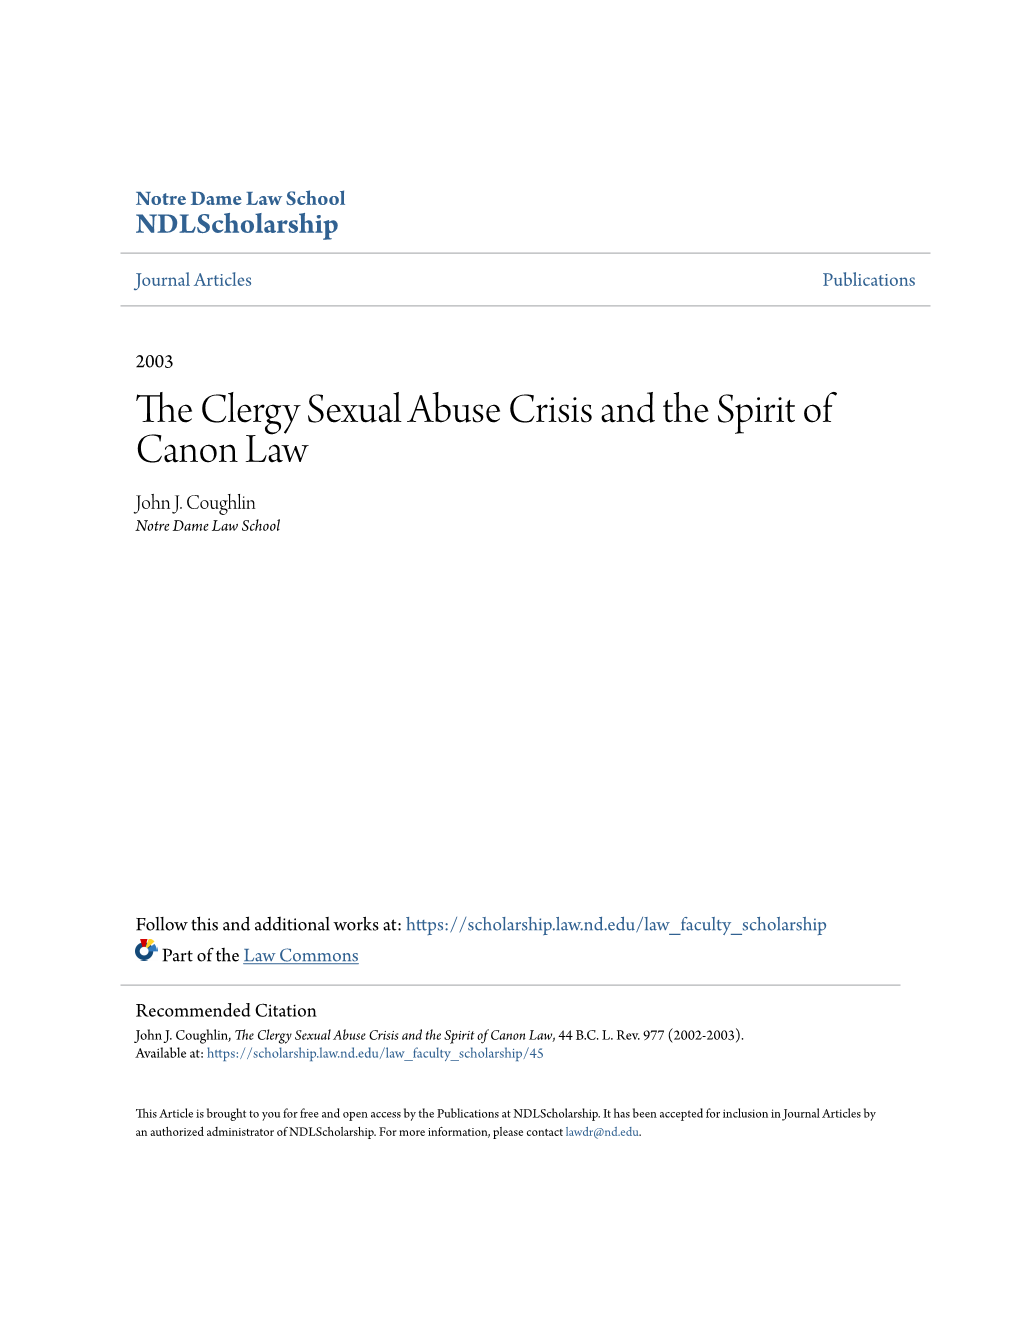 The Clergy Sexual Abuse Crisis and the Spirit of Canon Law, 44 B.C